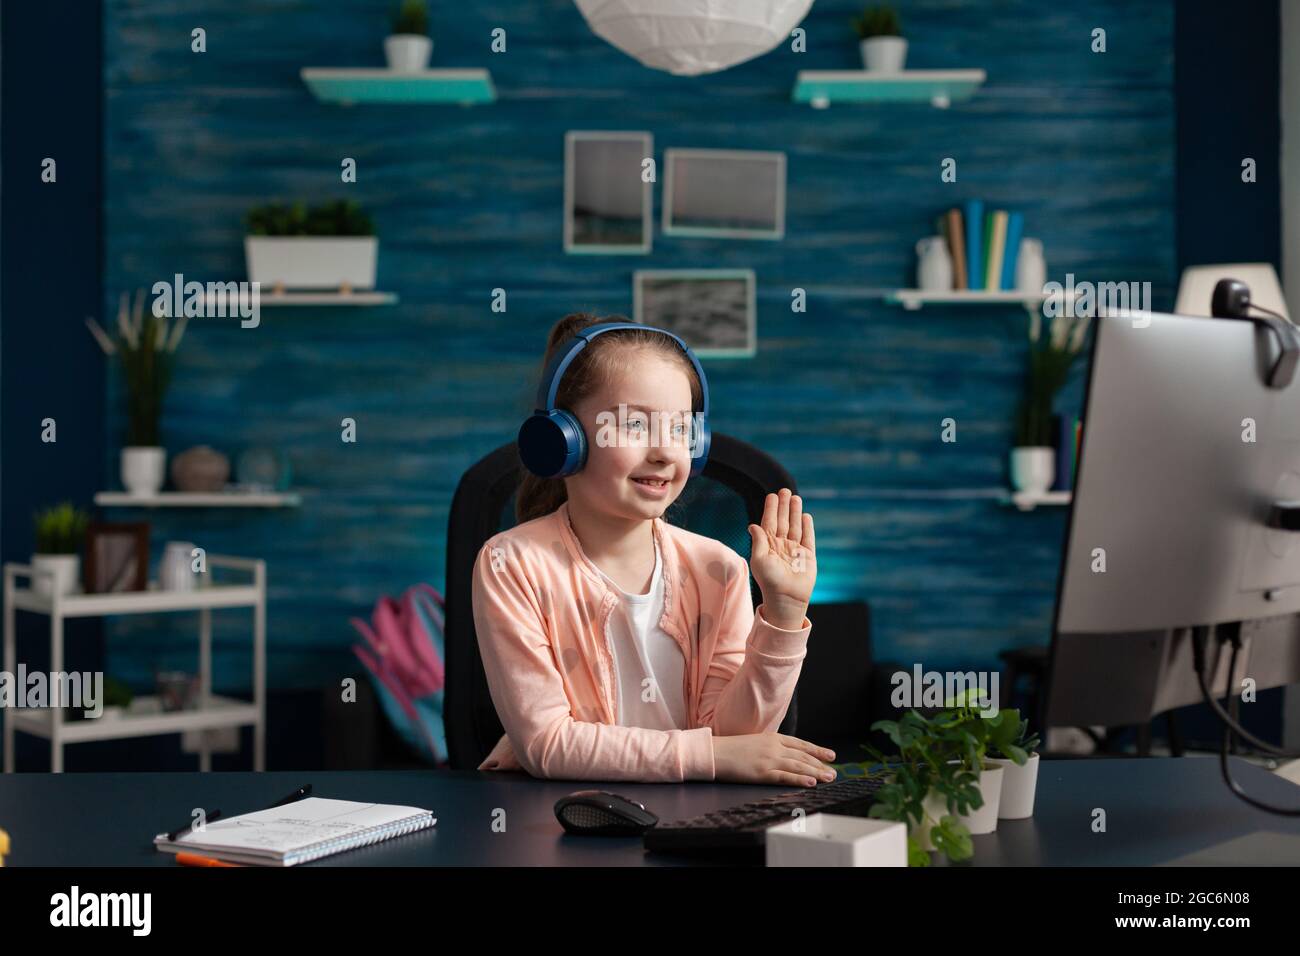 Modern school pupil paying attention to online class while using technology computer internet website and headphones. Clever girl working on education knowledge and digital communication Stock Photo